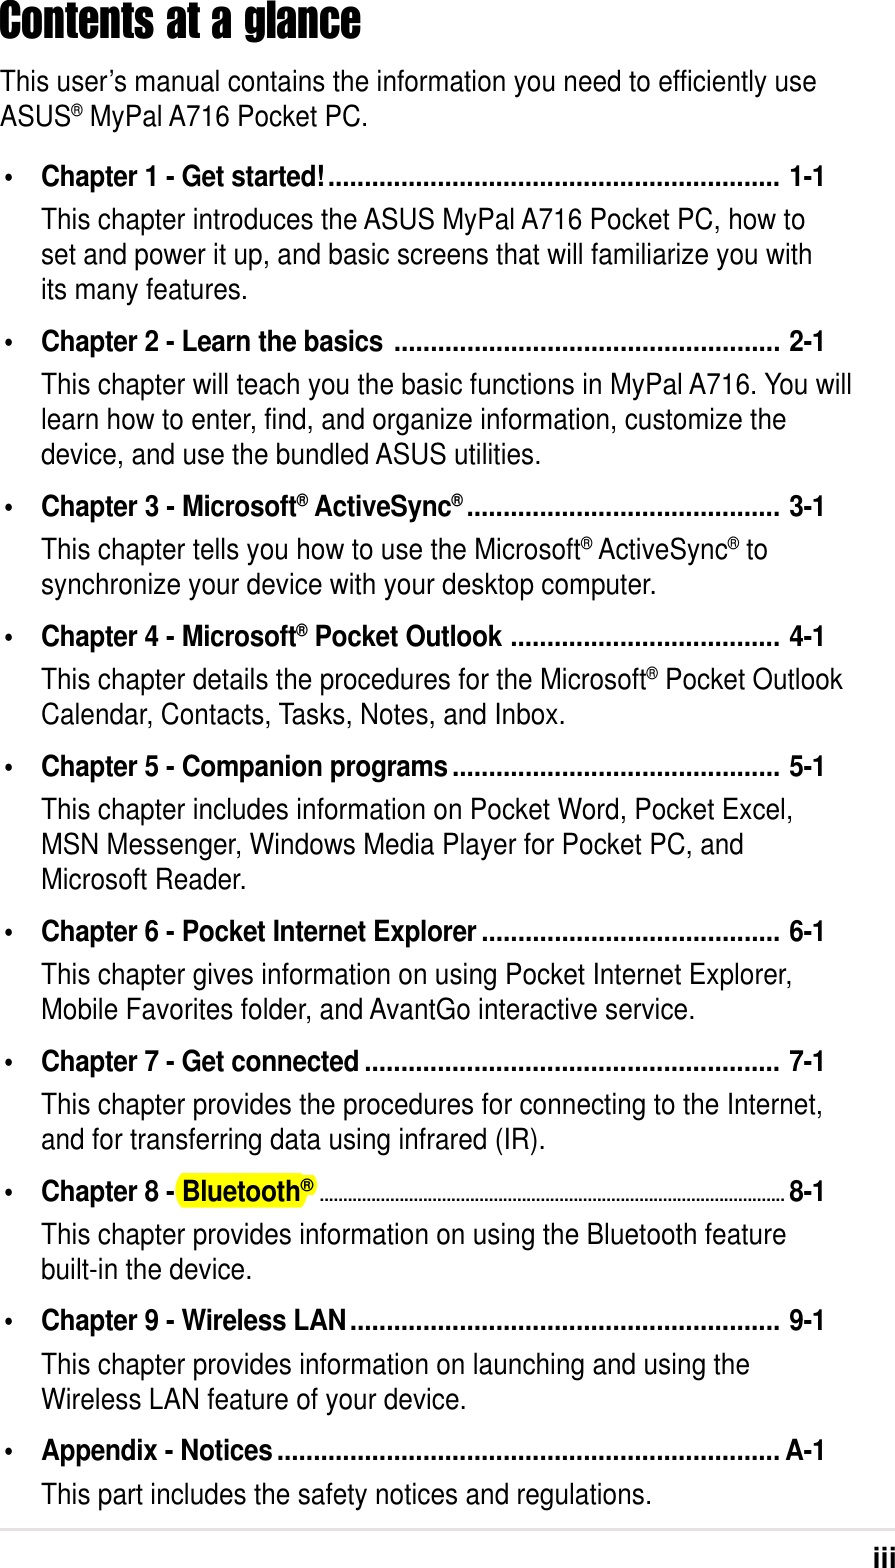 iiiContents at a glanceThis user’s manual contains the information you need to efficiently useASUS® MyPal A716 Pocket PC.•Chapter 1 - Get started!.............................................................. 1-1This chapter introduces the ASUS MyPal A716 Pocket PC, how toset and power it up, and basic screens that will familiarize you withits many features.•Chapter 2 - Learn the basics ..................................................... 2-1This chapter will teach you the basic functions in MyPal A716. You willlearn how to enter, find, and organize information, customize thedevice, and use the bundled ASUS utilities.•Chapter 3 - Microsoft® ActiveSync®........................................... 3-1This chapter tells you how to use the Microsoft® ActiveSync® tosynchronize your device with your desktop computer.•Chapter 4 - Microsoft® Pocket Outlook ..................................... 4-1This chapter details the procedures for the Microsoft® Pocket OutlookCalendar, Contacts, Tasks, Notes, and Inbox.•Chapter 5 - Companion programs............................................. 5-1This chapter includes information on Pocket Word, Pocket Excel,MSN Messenger, Windows Media Player for Pocket PC, andMicrosoft Reader.•Chapter 6 - Pocket Internet Explorer ......................................... 6-1This chapter gives information on using Pocket Internet Explorer,Mobile Favorites folder, and AvantGo interactive service.•Chapter 7 - Get connected ......................................................... 7-1This chapter provides the procedures for connecting to the Internet,and for transferring data using infrared (IR).•Chapter 8 - Bluetooth®...................................................................................................8-1This chapter provides information on using the Bluetooth featurebuilt-in the device.•Chapter 9 - Wireless LAN........................................................... 9-1This chapter provides information on launching and using theWireless LAN feature of your device.•Appendix - Notices ..................................................................... A-1This part includes the safety notices and regulations.